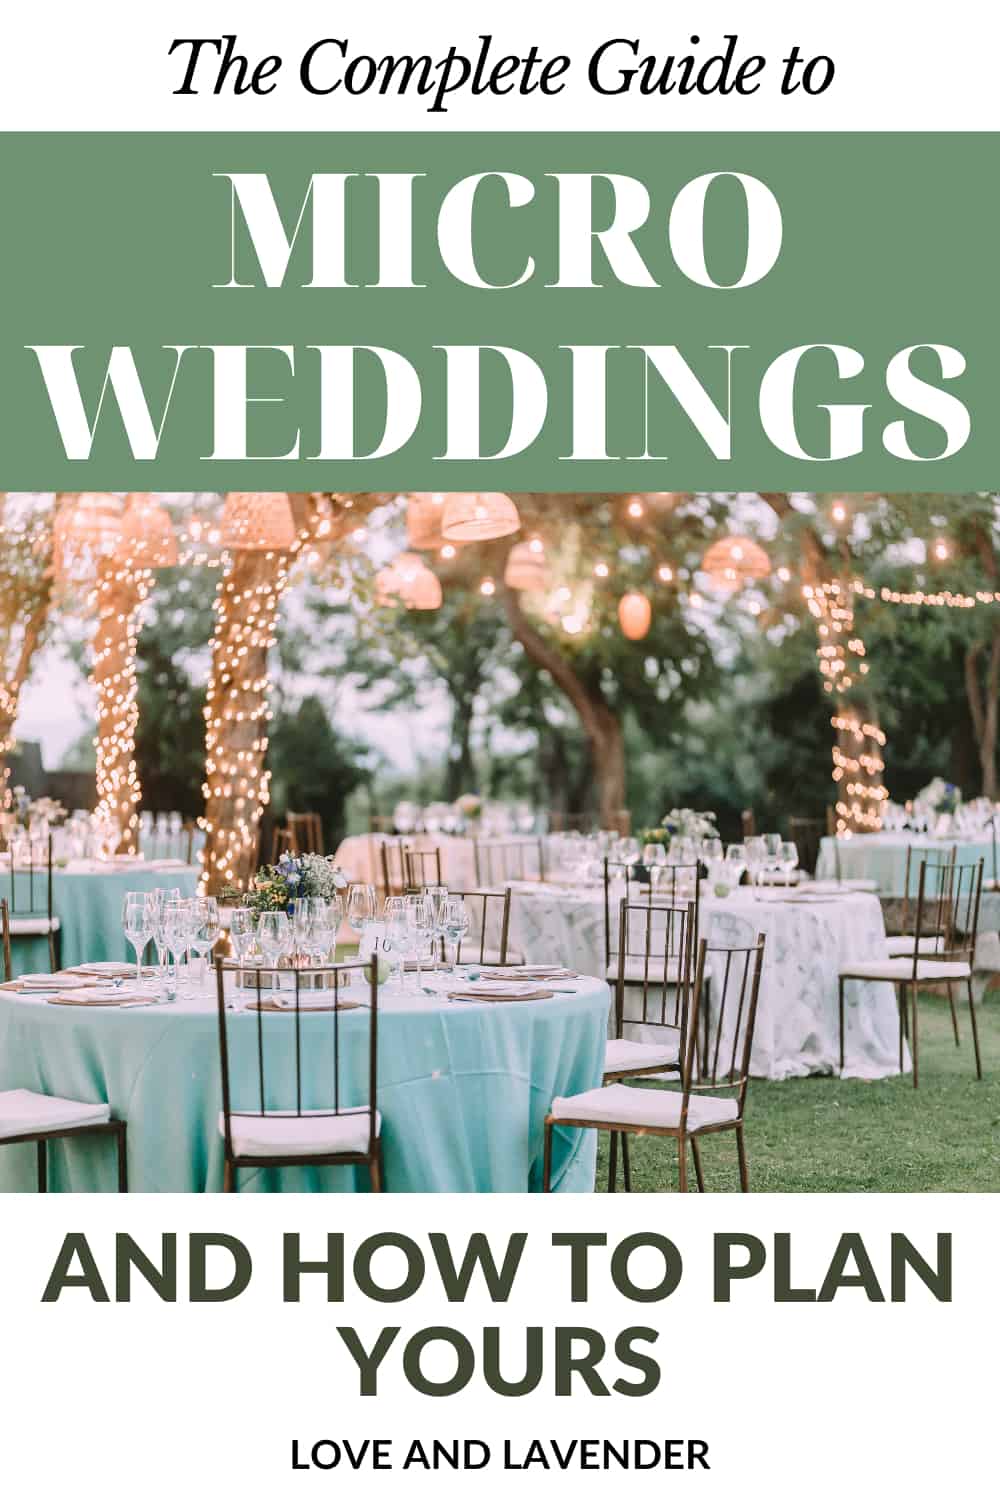 Pinterest pin - The Complete Guide to Micro Weddings